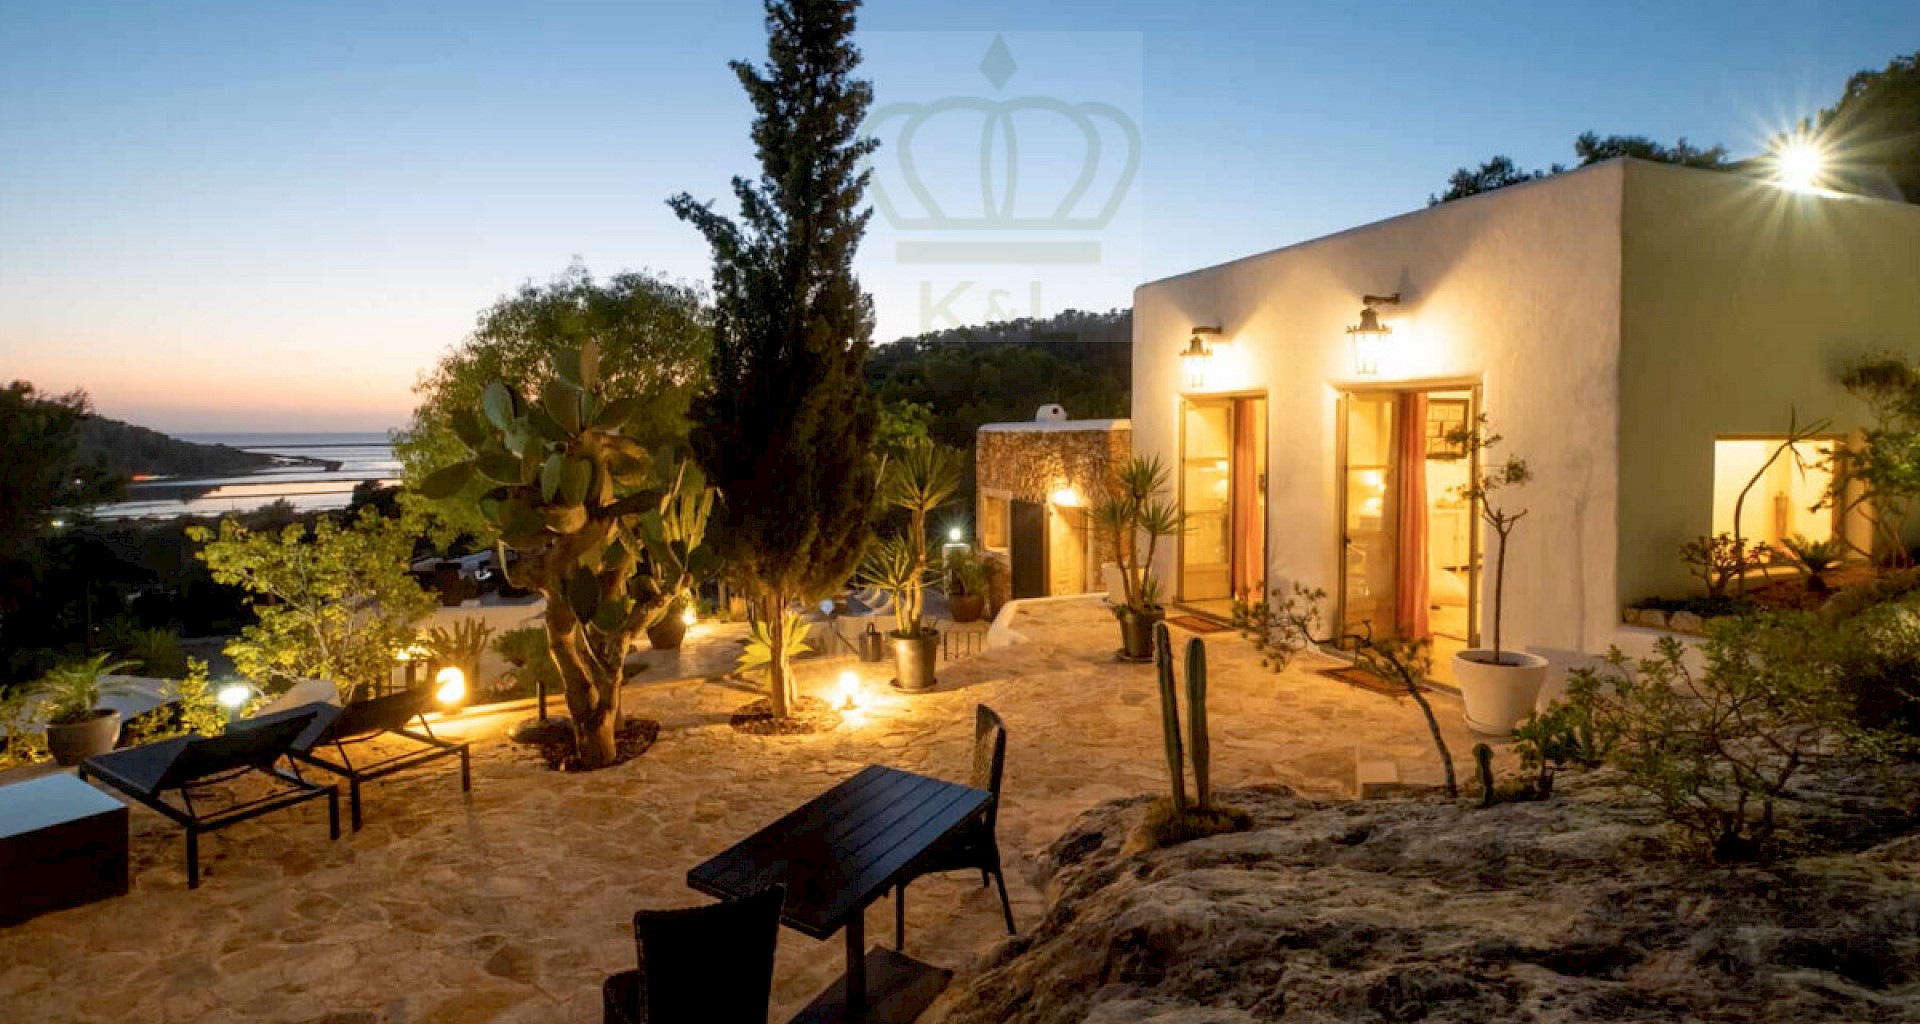 KROHN & LUEDEMANN Sea view Finca in Ses Salines on Ibiza with views of the salt mine with licence for holiday rental Villa Ses Salines Ibiza 02